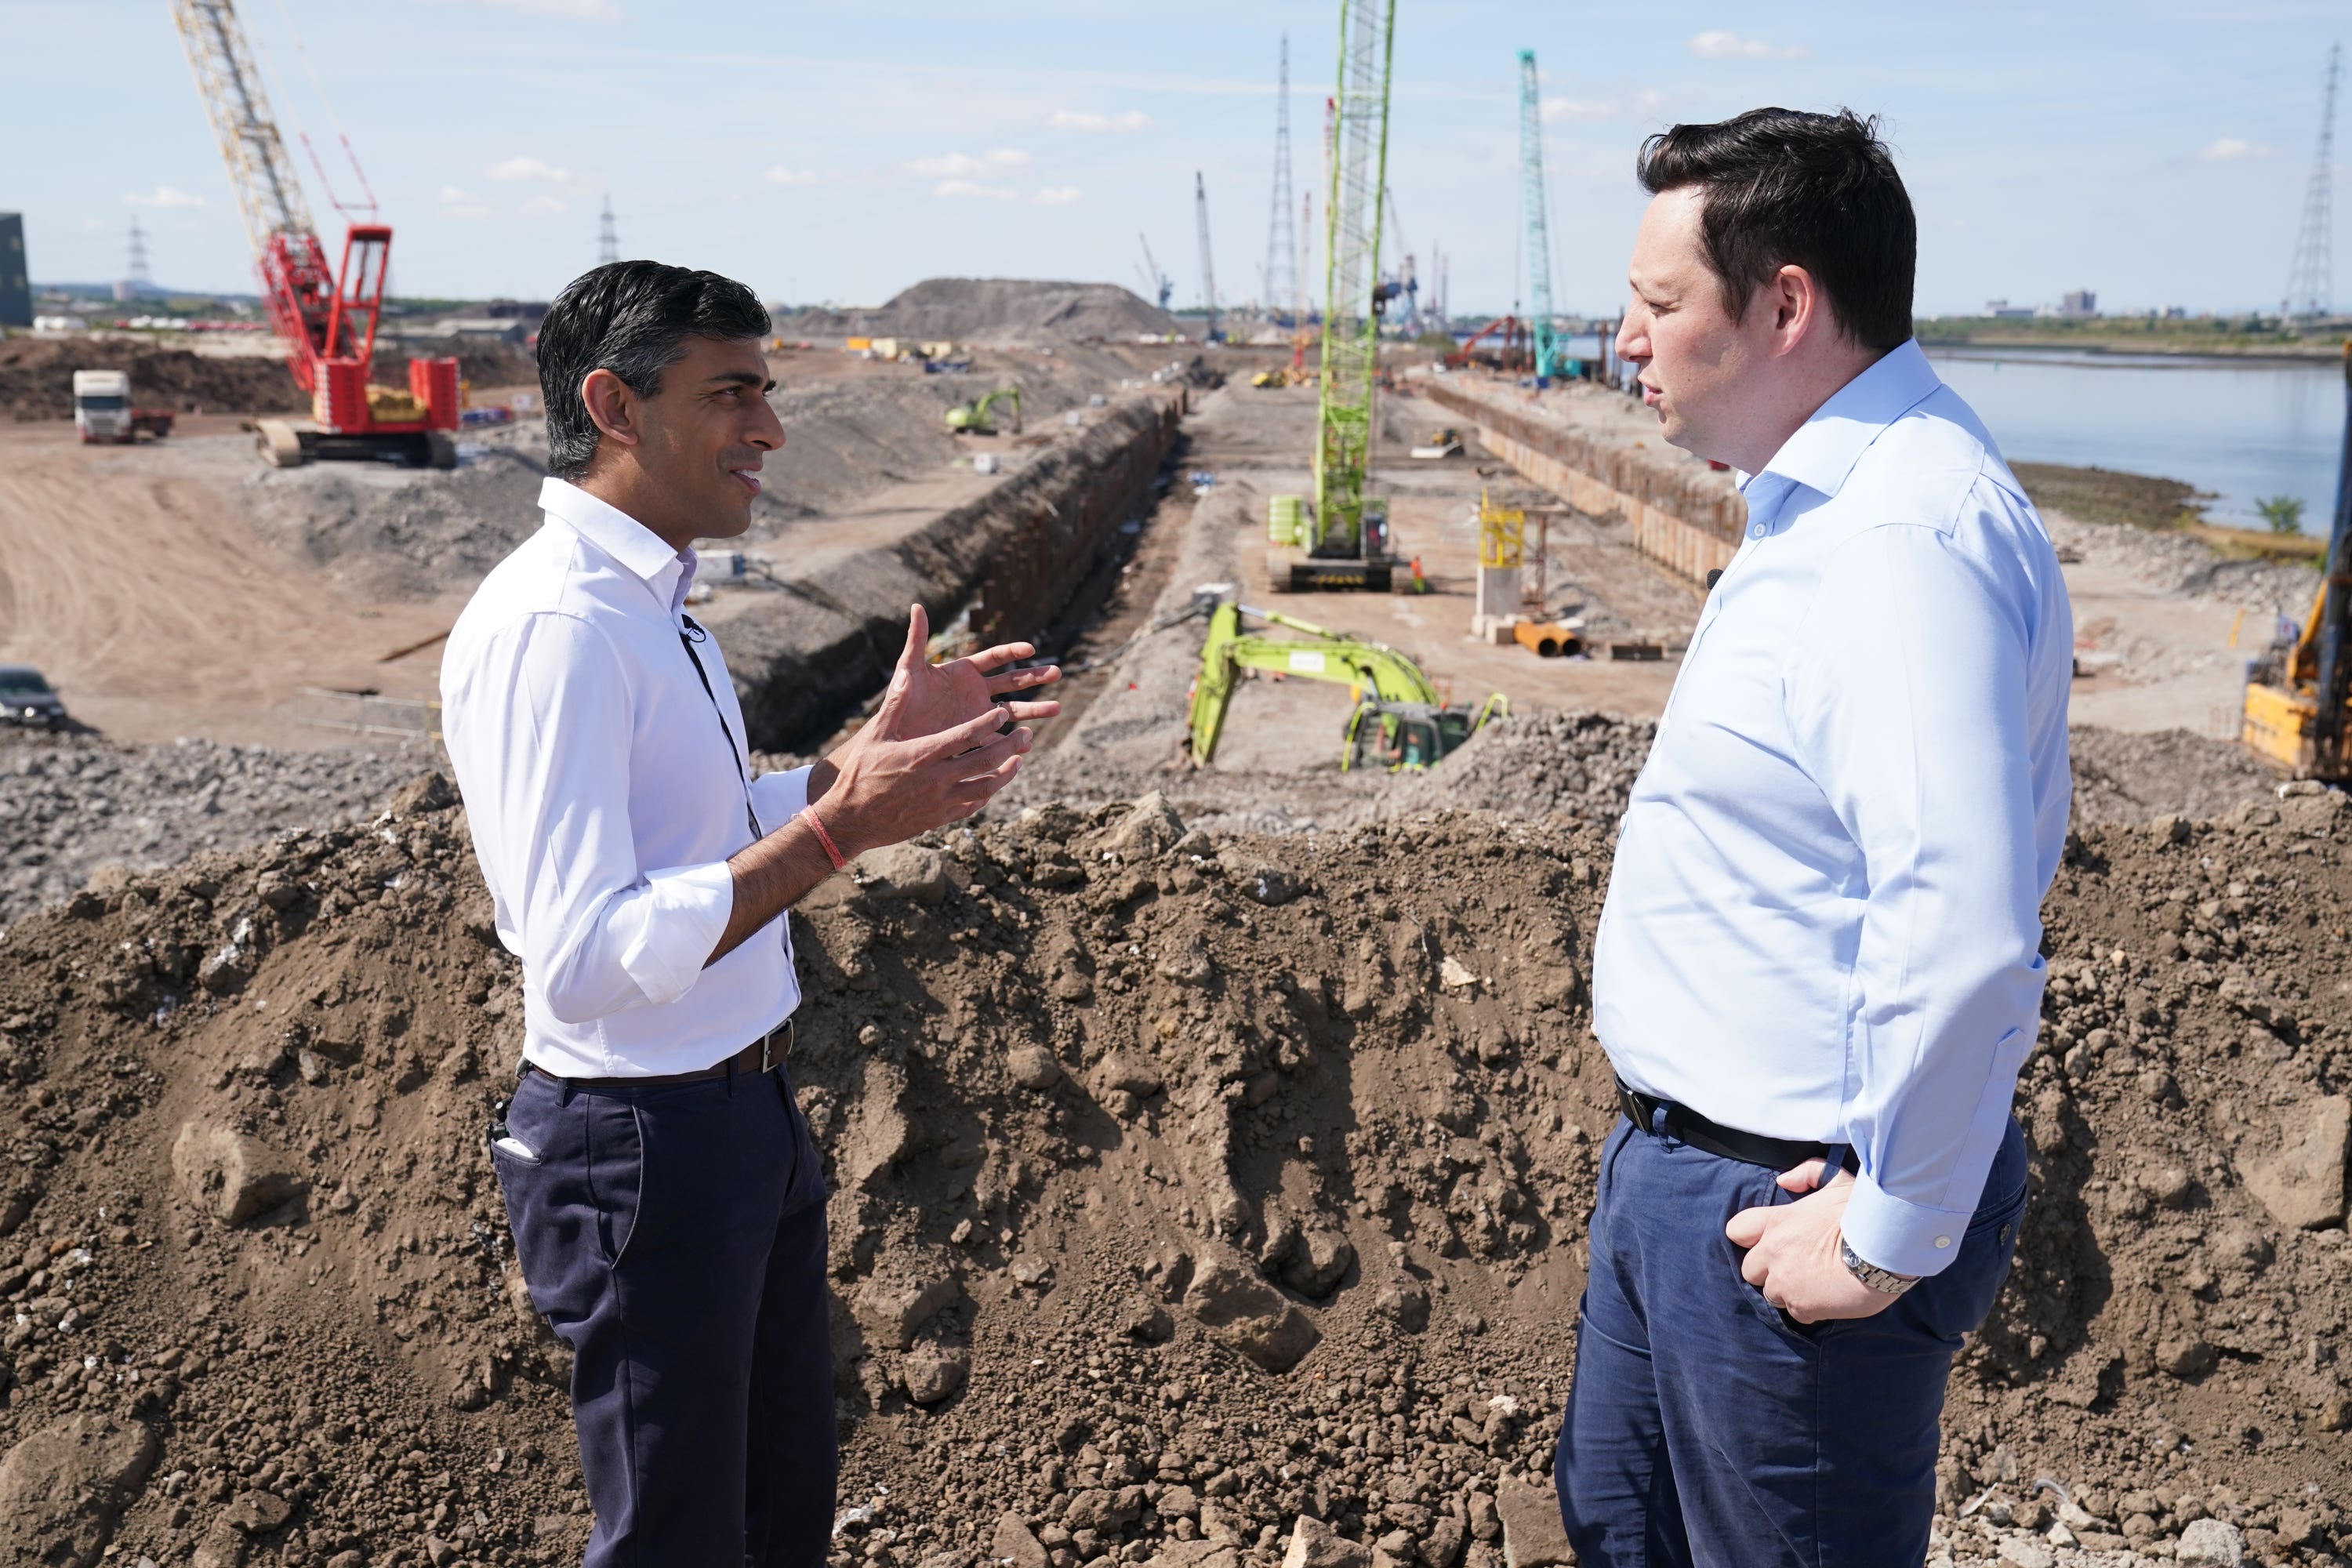 Rishi Sunak (left) speaks with Tees Valley Mayor, Ben Houchen, during a visit to Teesside Freeport, Teesworks, in Redcar, Teeside, as he outlines his vision for the future of Britain, as part of his campaign to become the next leader of the Conservative and Unionist Party and Prime Minister. Picture date: Saturday July 16, 2022.